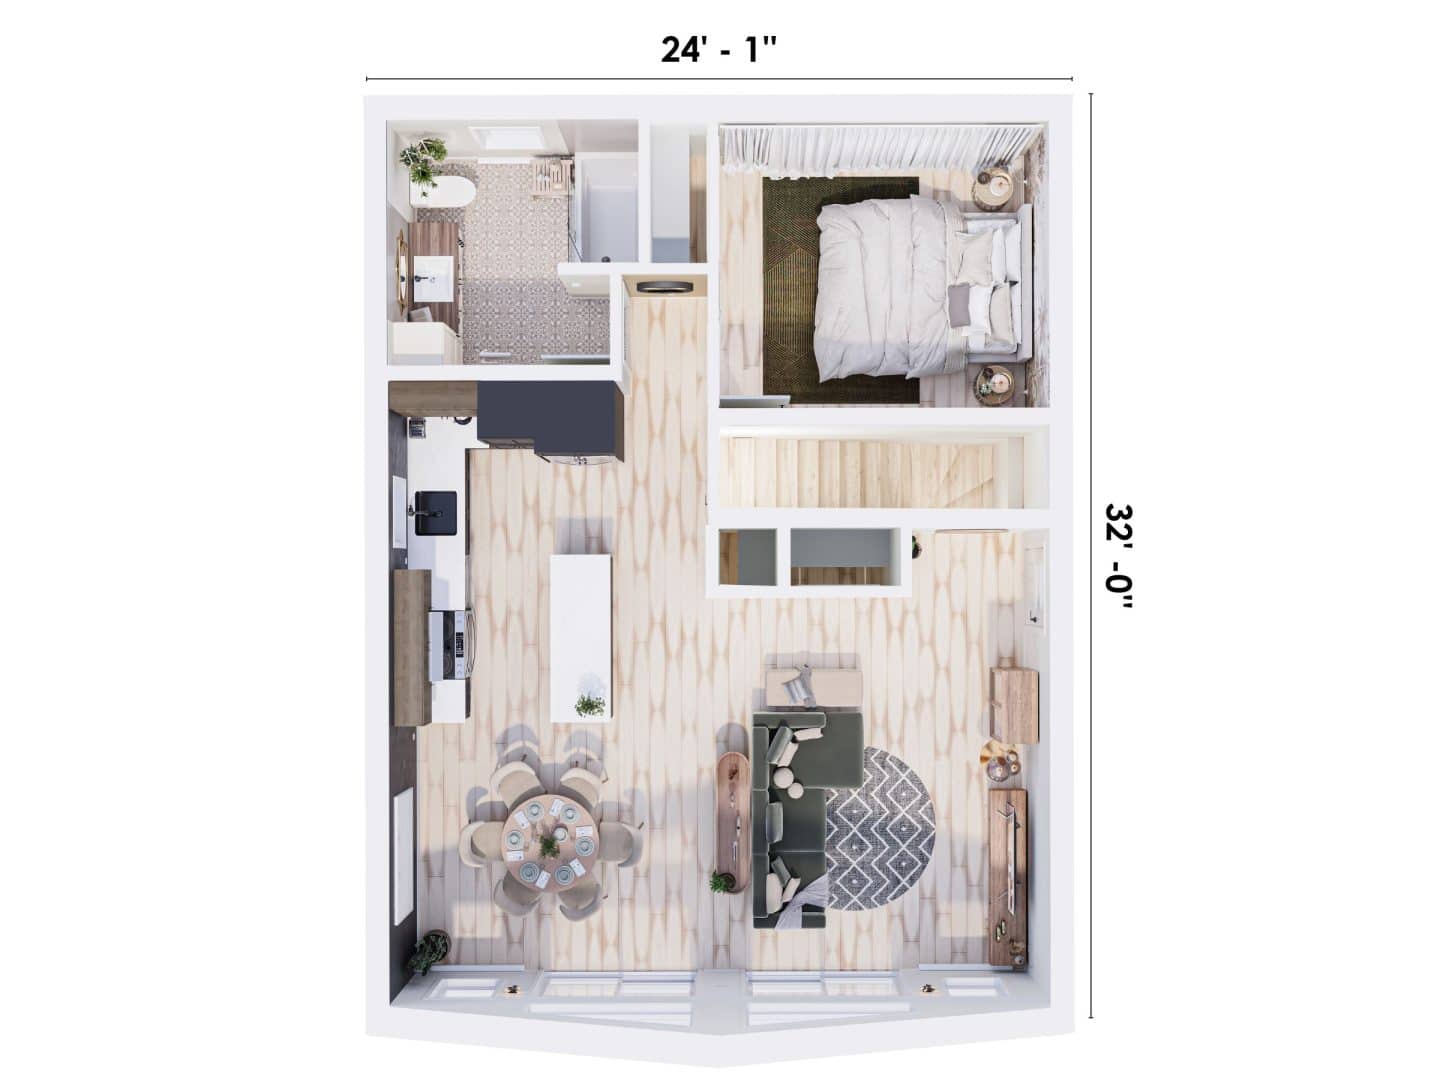 Épervier model, a single-storey chalet. View of the 3D plan from above.